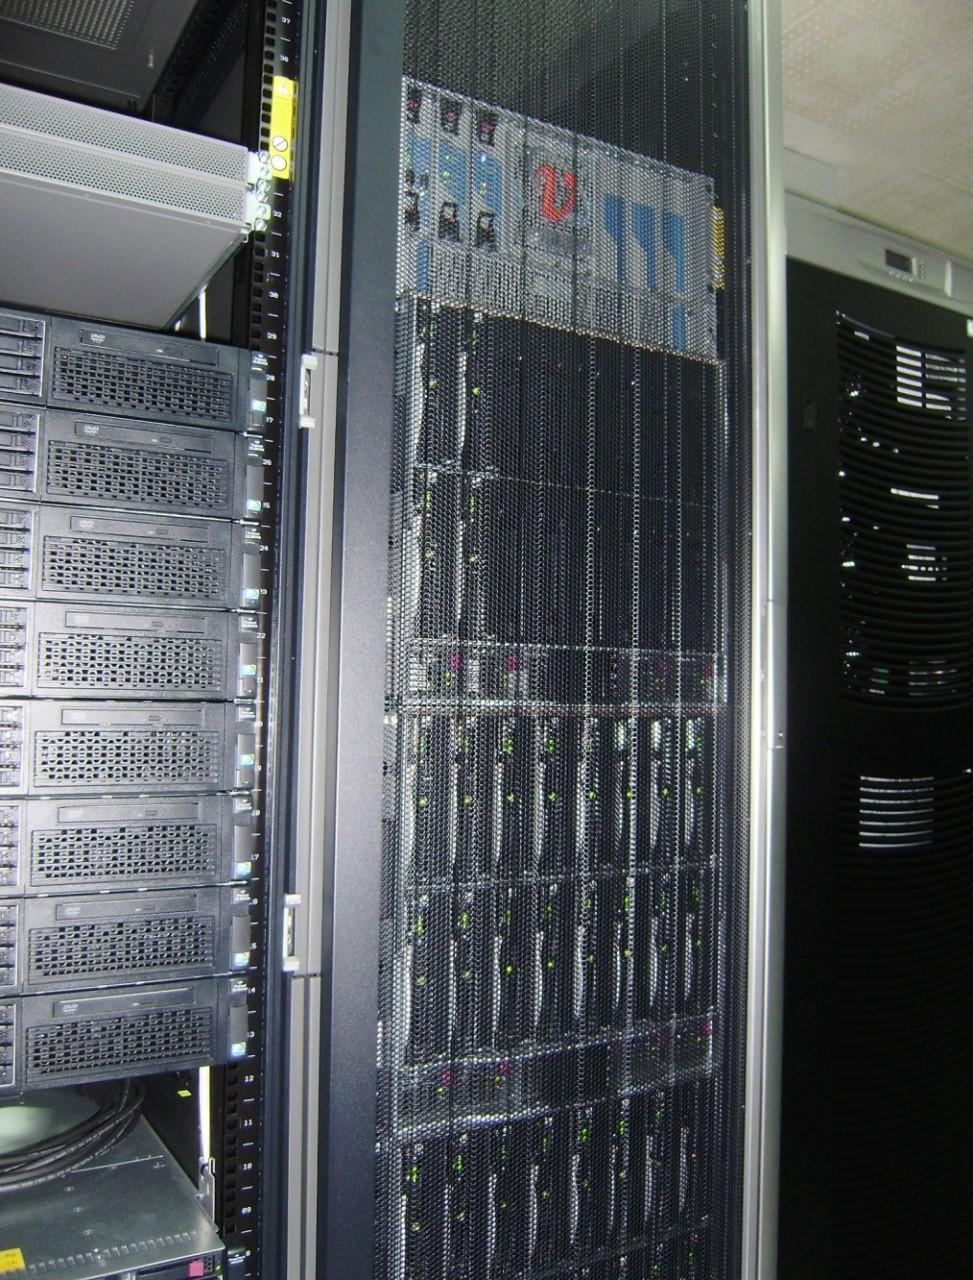 Bulgarian HPC Resources HPC Cluster at IICT-BAS 3 chassis HP Cluster Platform Express 7000, 36 blades BL 280c, dual Intel Xeon X5560 @ 2.